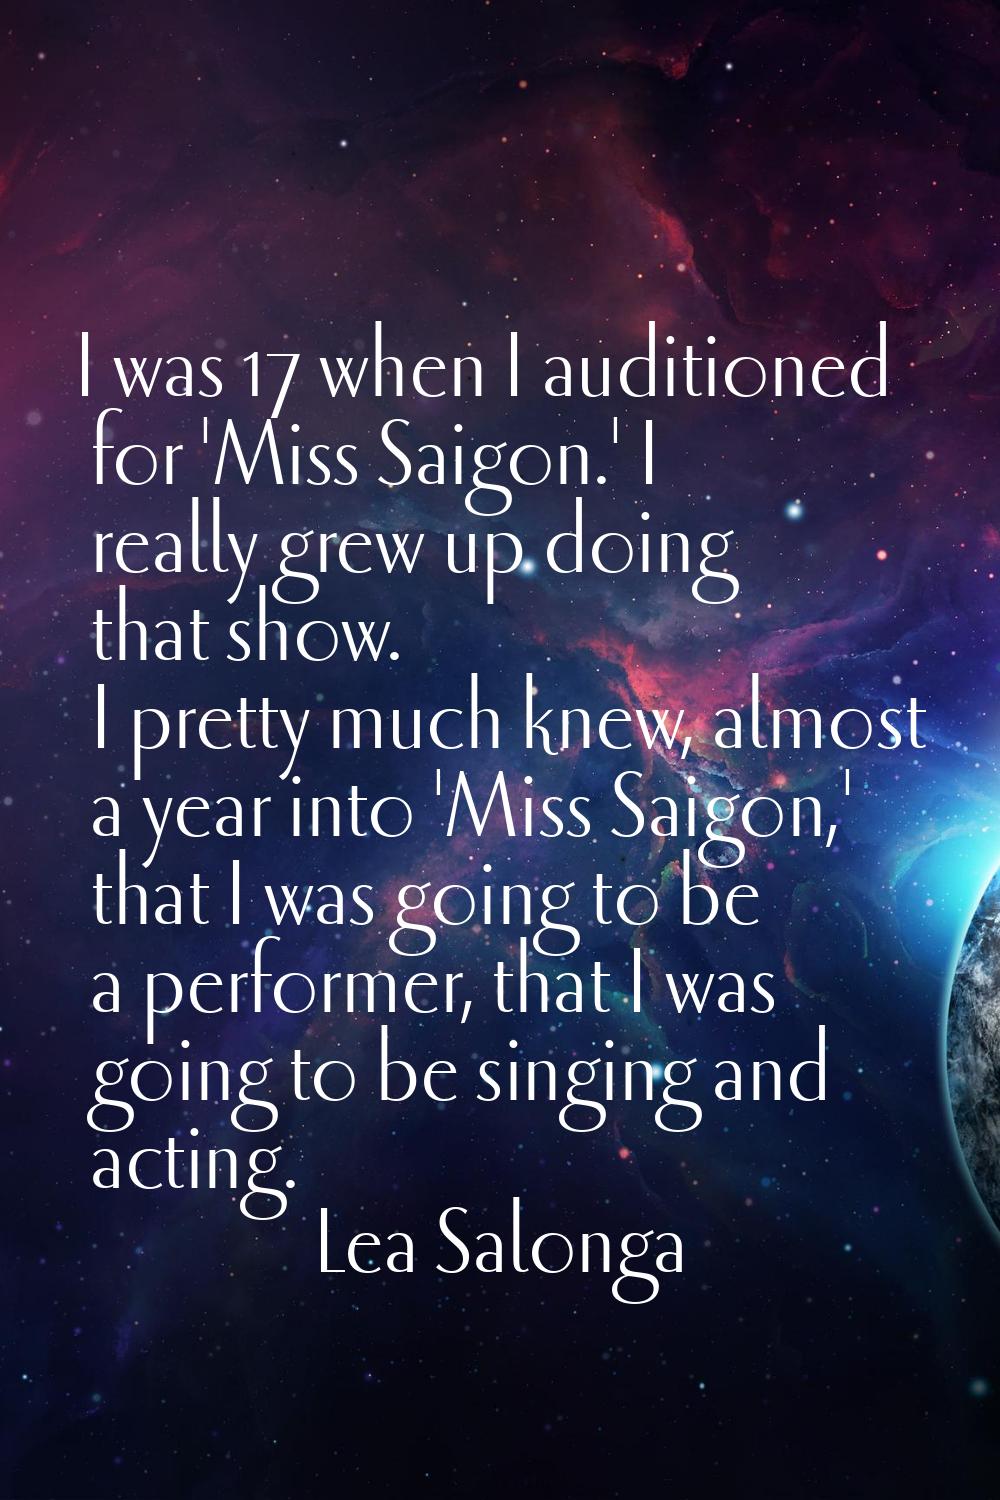 I was 17 when I auditioned for 'Miss Saigon.' I really grew up doing that show. I pretty much knew,